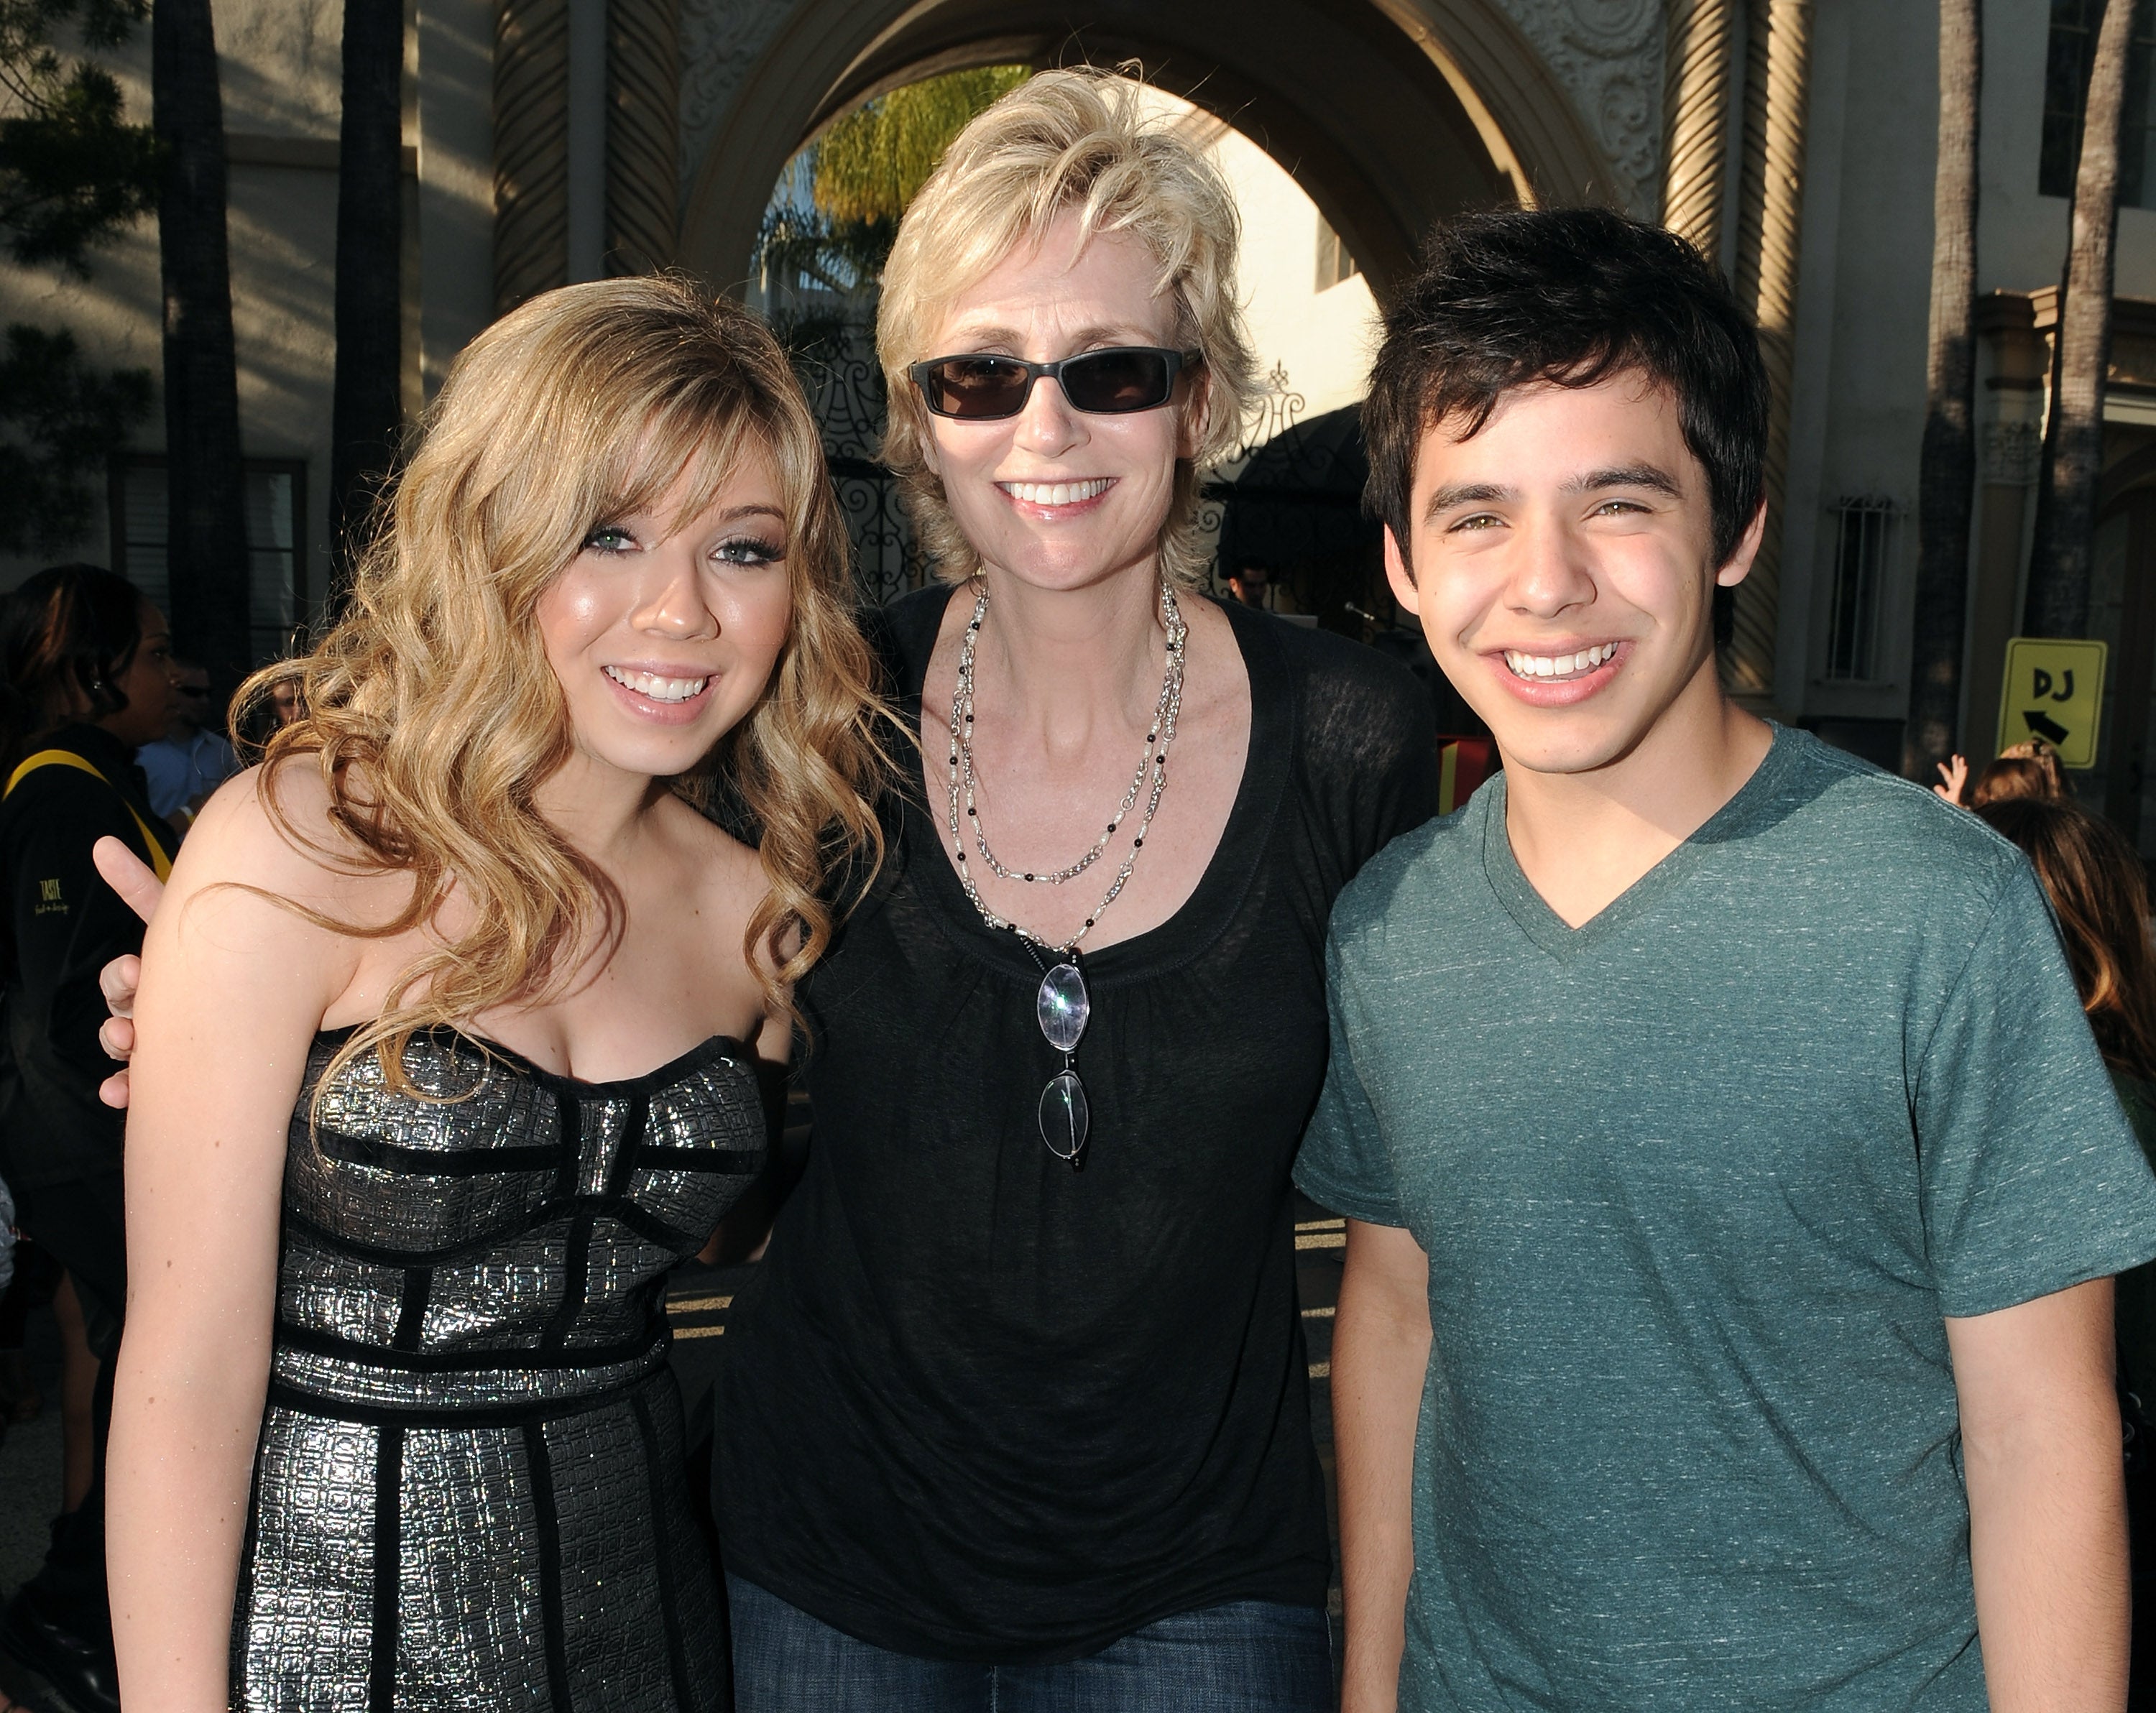 Archuletta (right) with Jennette McCurdy and Jane Lynch in 2010